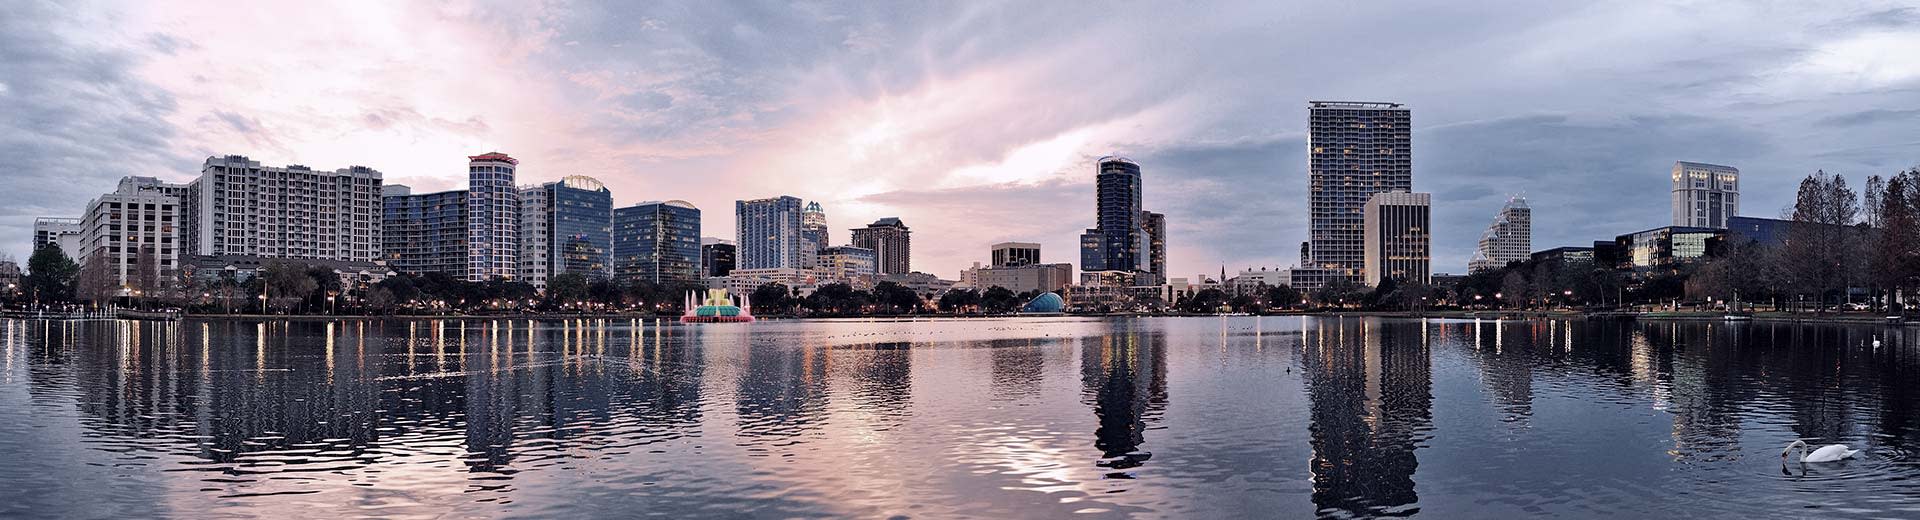 Tall square buildings of Orlando overlook the water of the Atlantic Ocean.